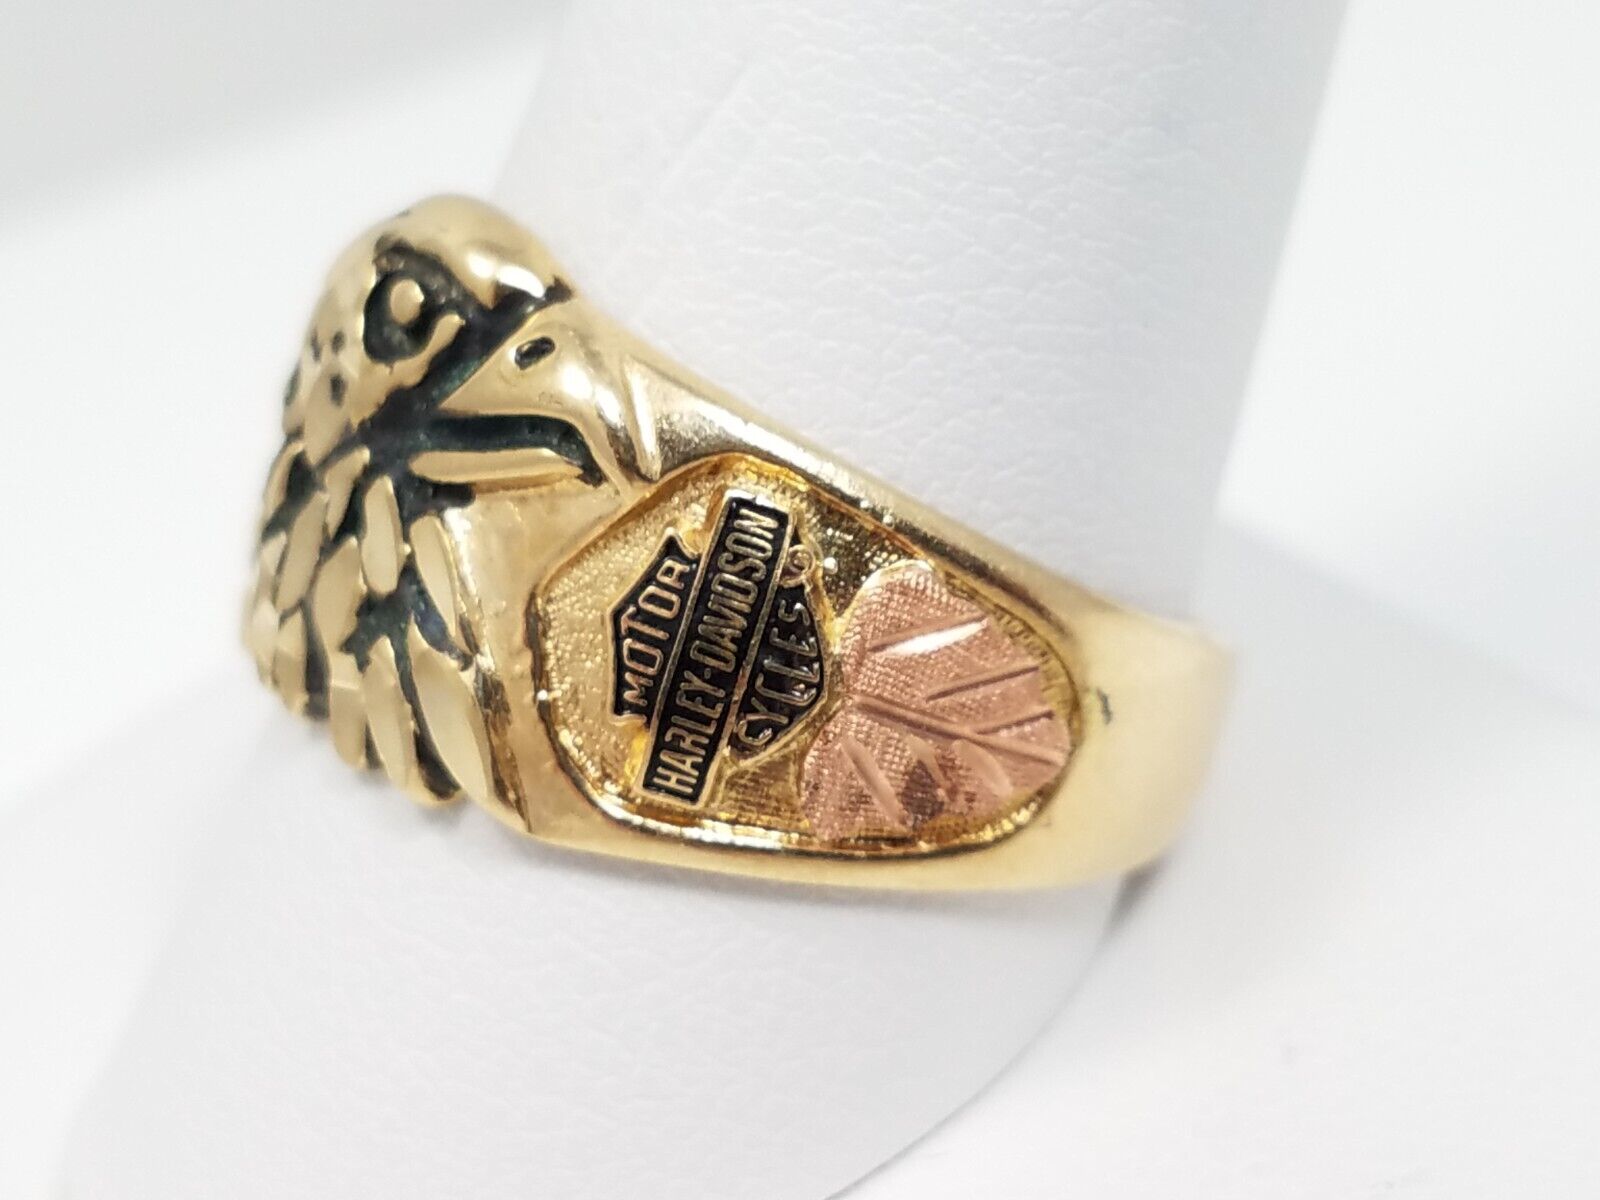 10K Yellow Gold Authentic Harley Davidson Eagle Ring